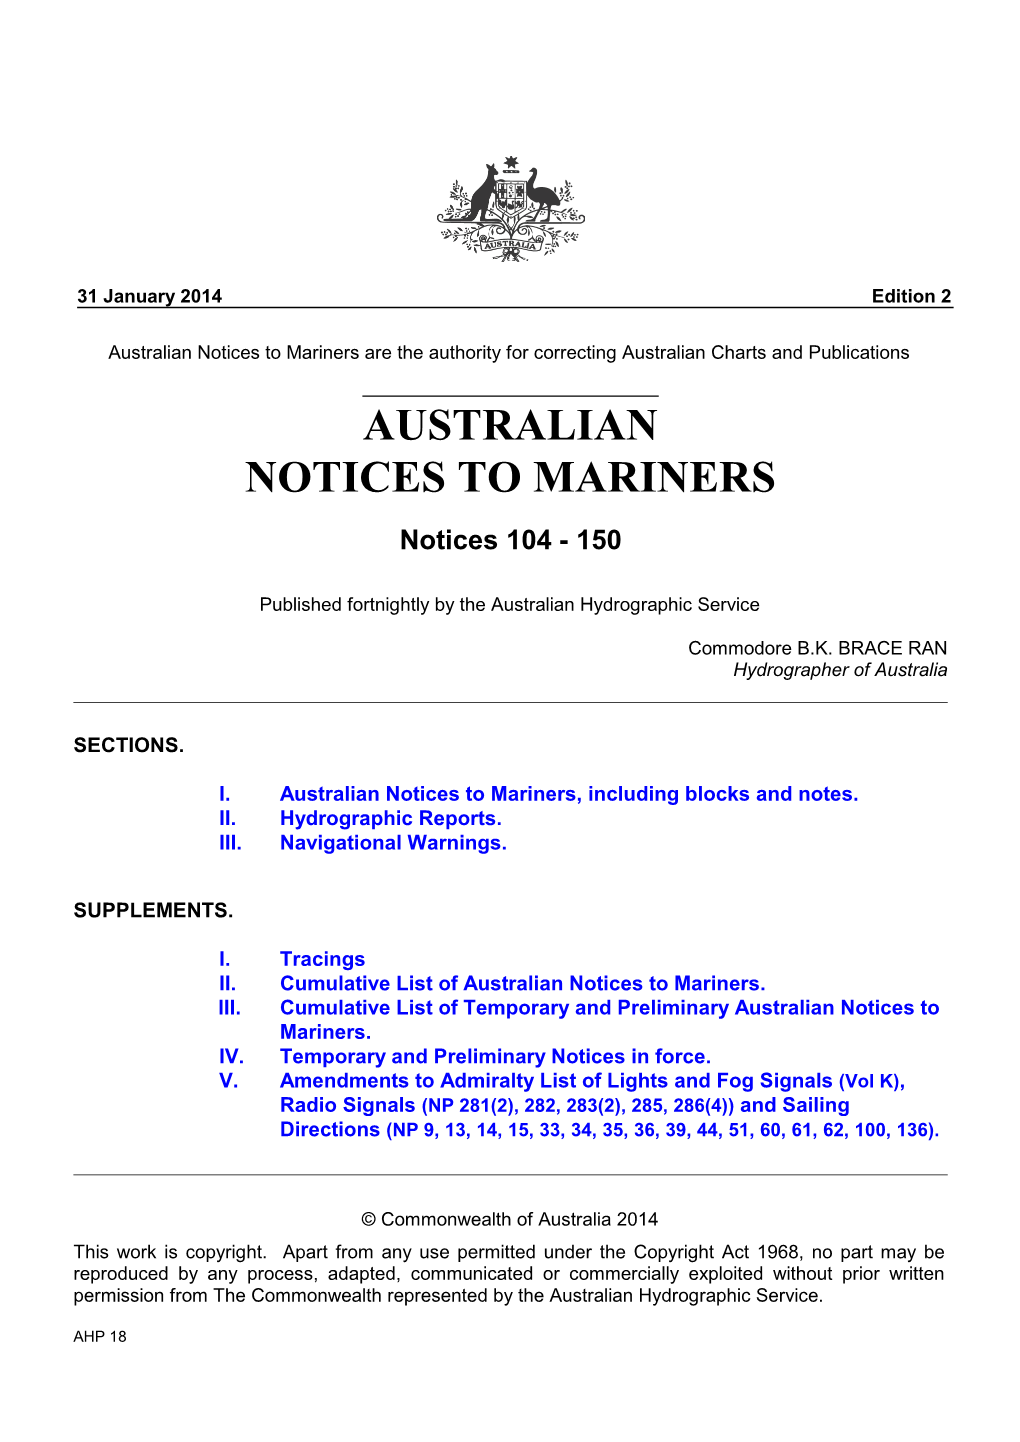 Australian Notices to Mariners Are the Authority for Correcting Australian Charts and Publications AUSTRALIAN NOTICES to MARINERS Notices 104 - 150